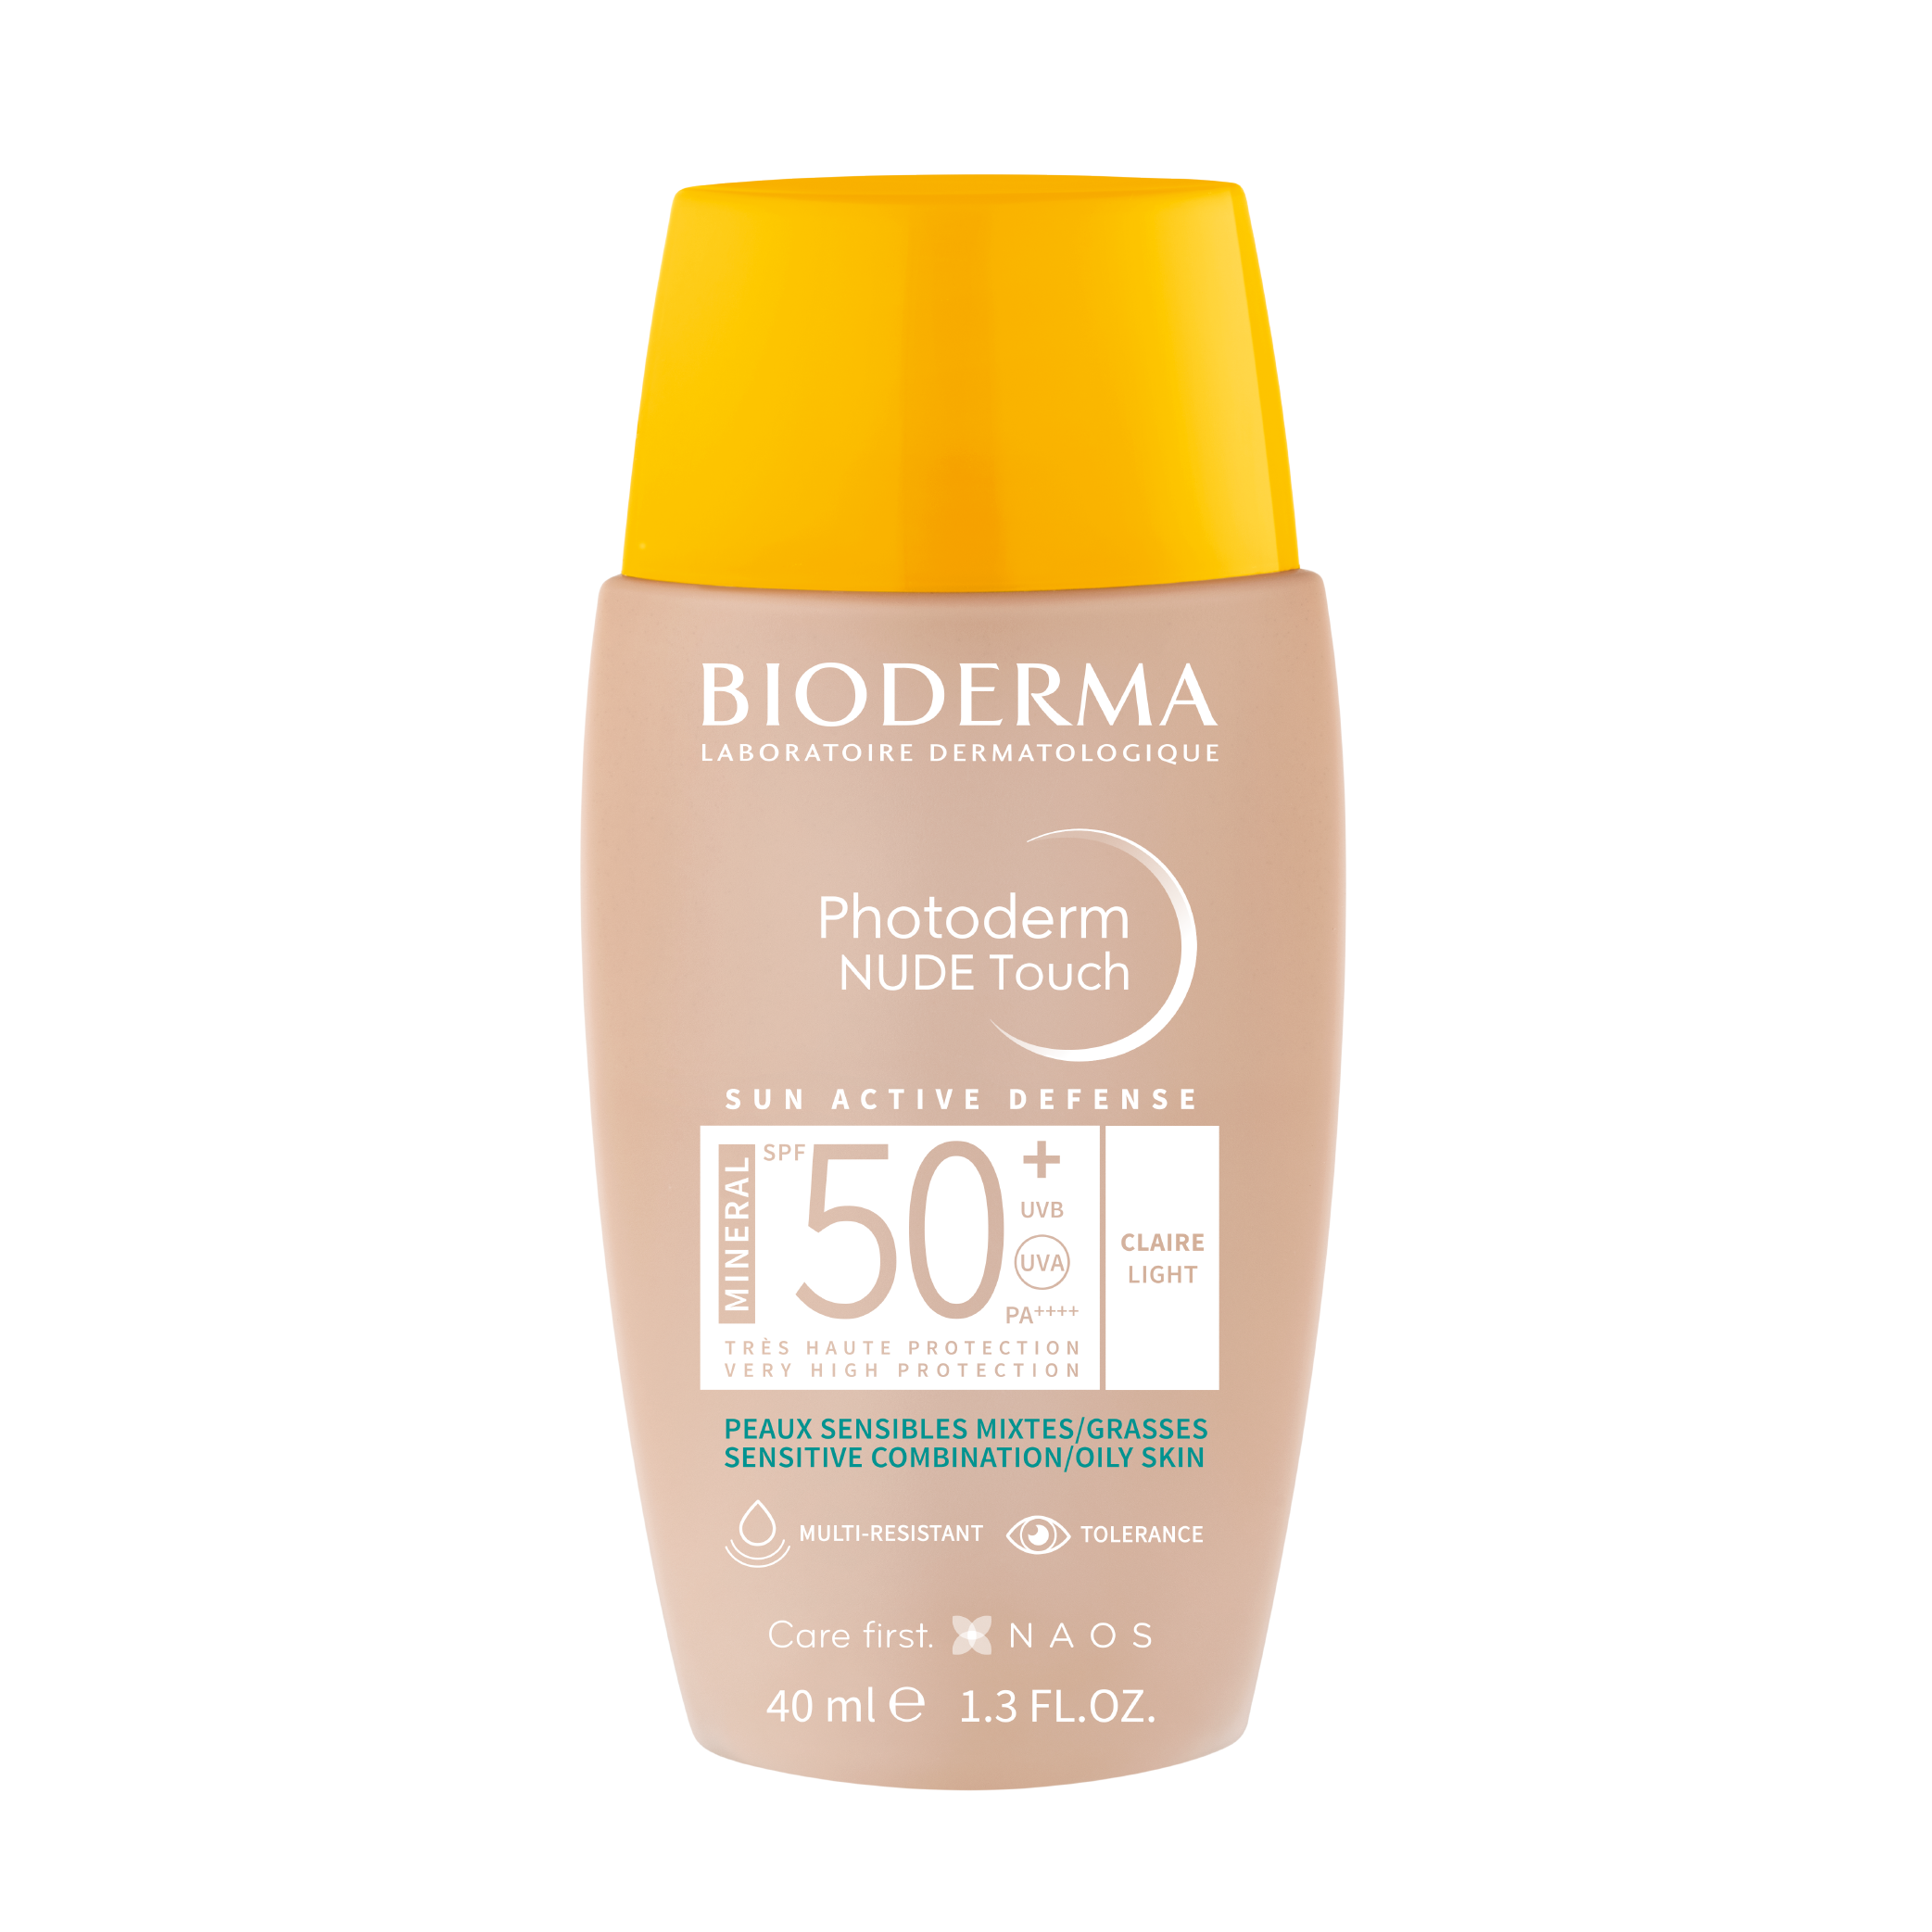 Photoderm Nude Touch SPF 50+ Teinte Claire Light 40ml